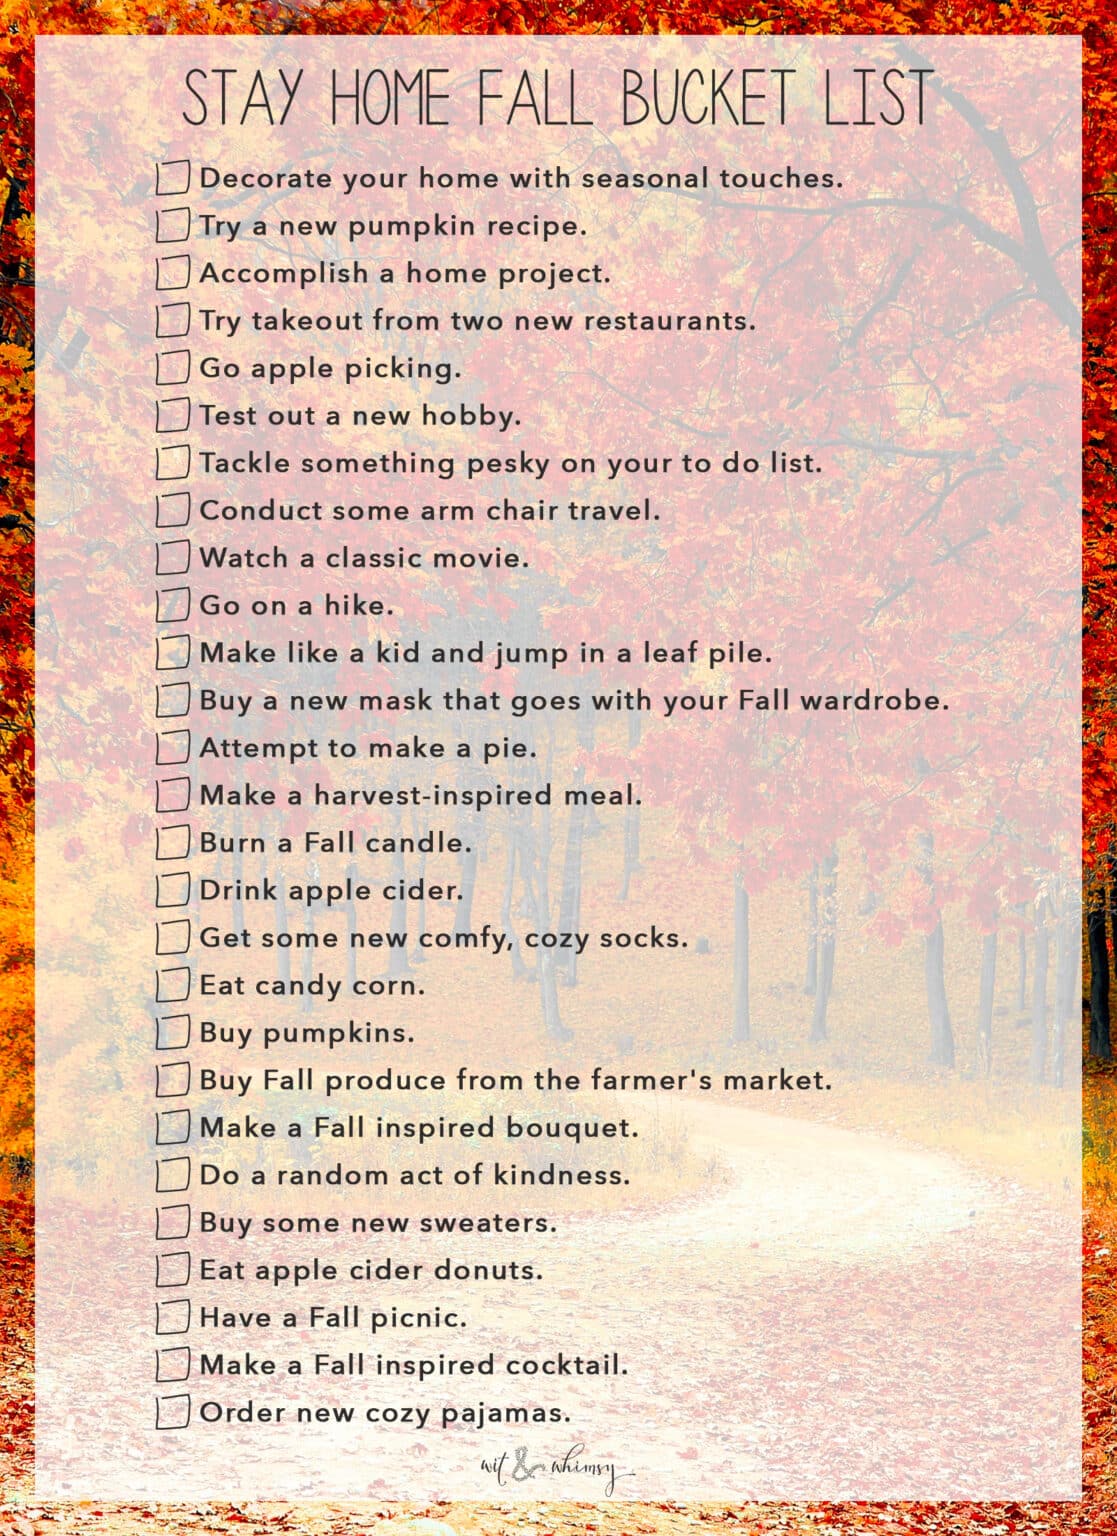 Stay Home Fall Bucket List - wit & whimsy | Lifestyle Blog